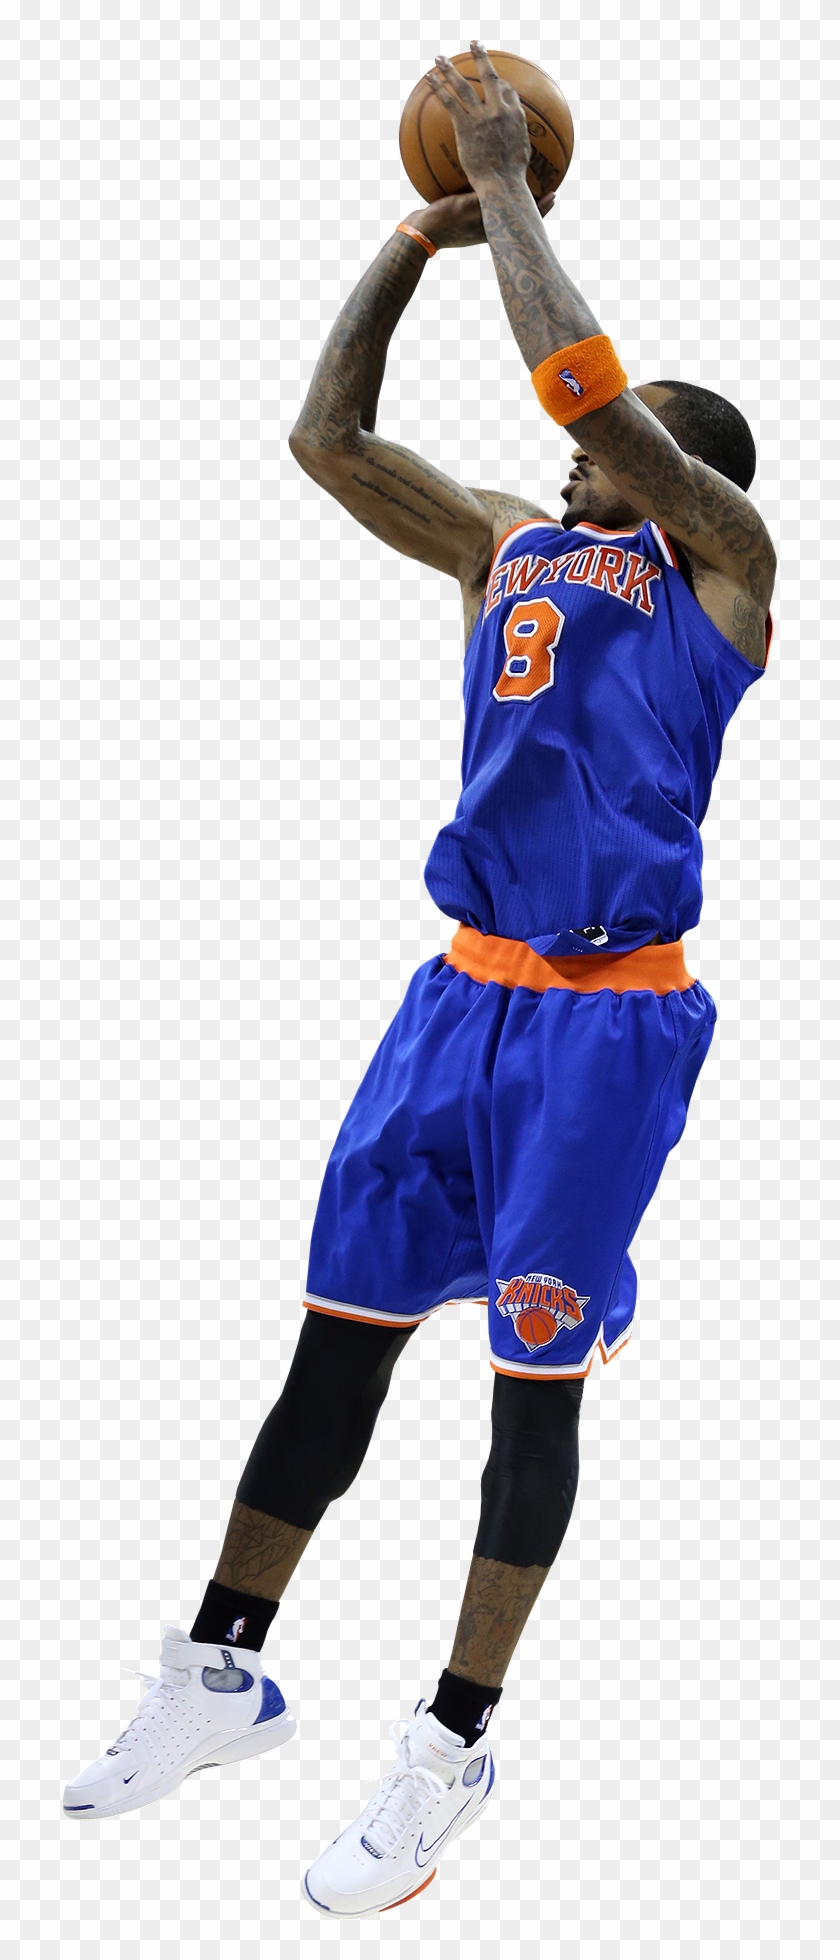 Jr Smith Photo By Friartown Photobucket - Costume Clipart #2055342